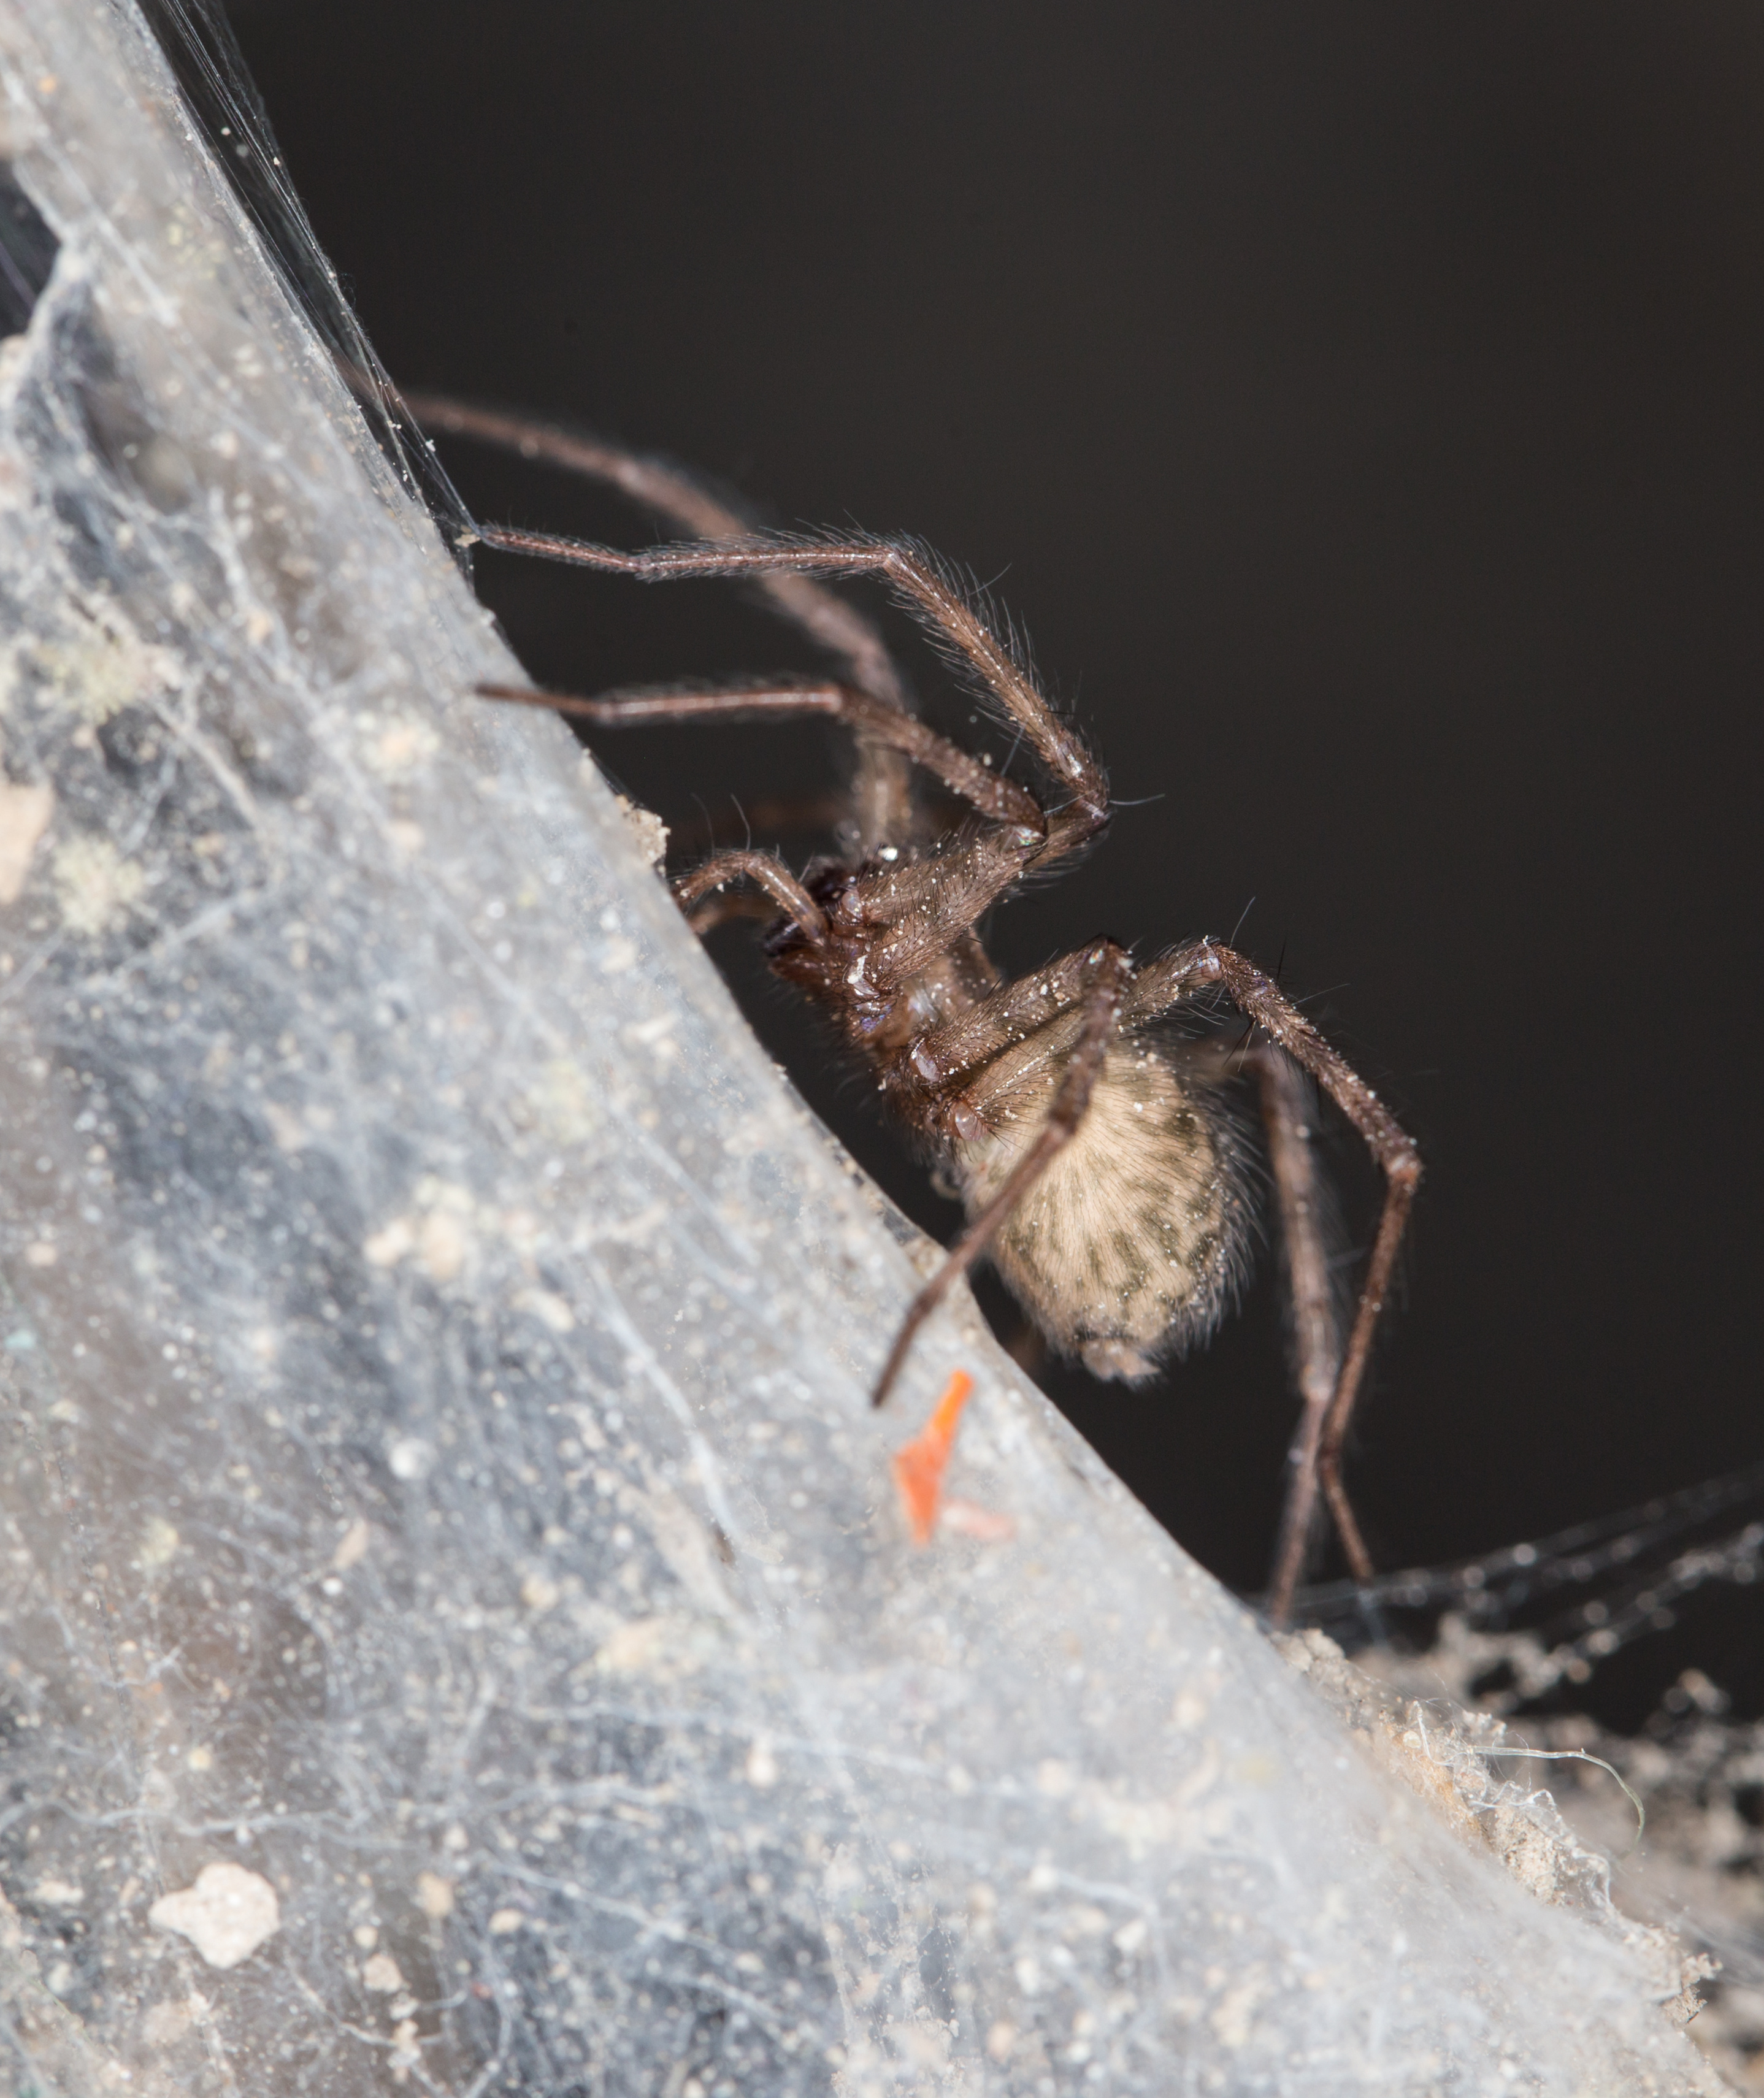 A spider crawling up a web - call Thorn Pest Solutions Utah County to remove spiders in your home!